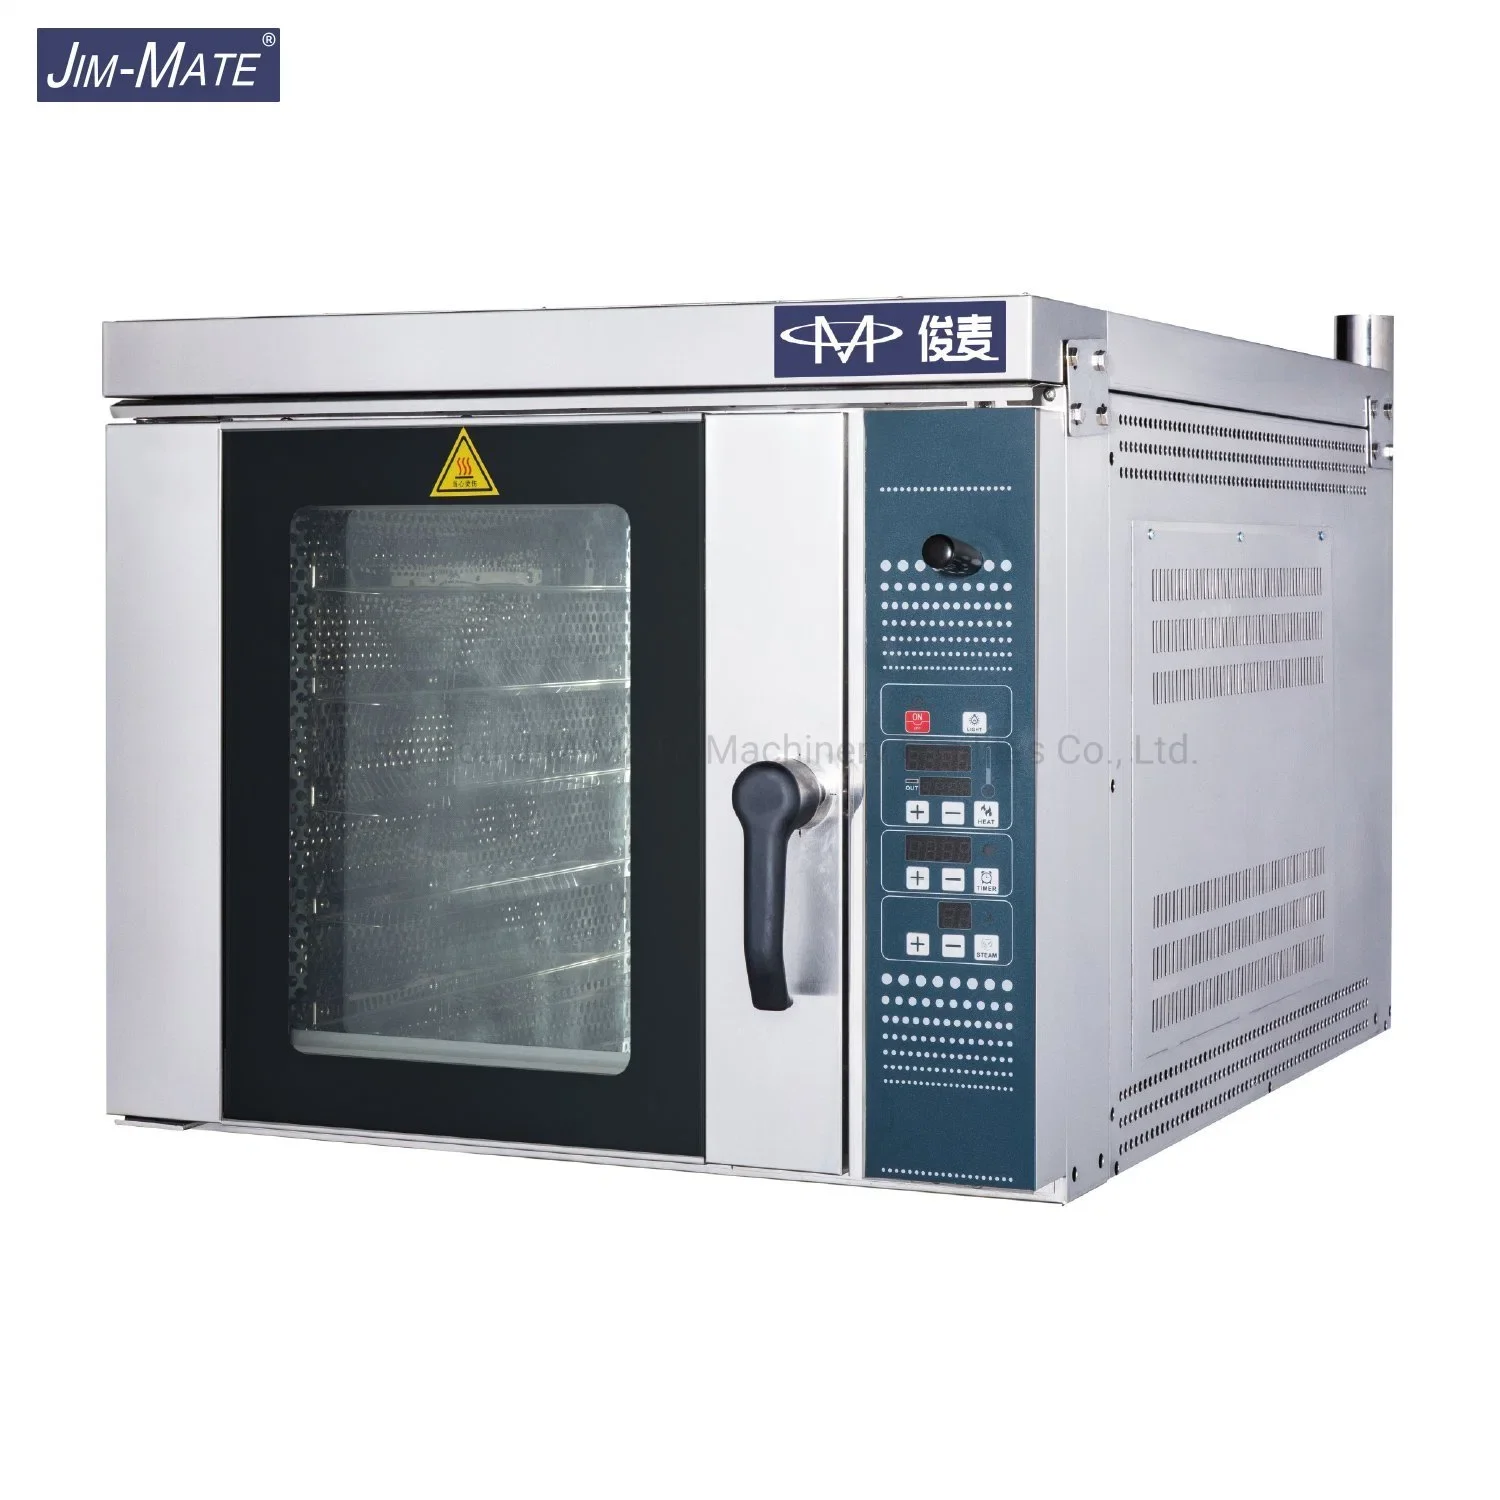 Bakery Equipment Kitchen Catering Equipment Commercial Use Cake Shop Machine 5 Trays Bread Cake Pizza Baking Machine Electric catering baking equipment bread bakery souffle pancake souffle cake machine